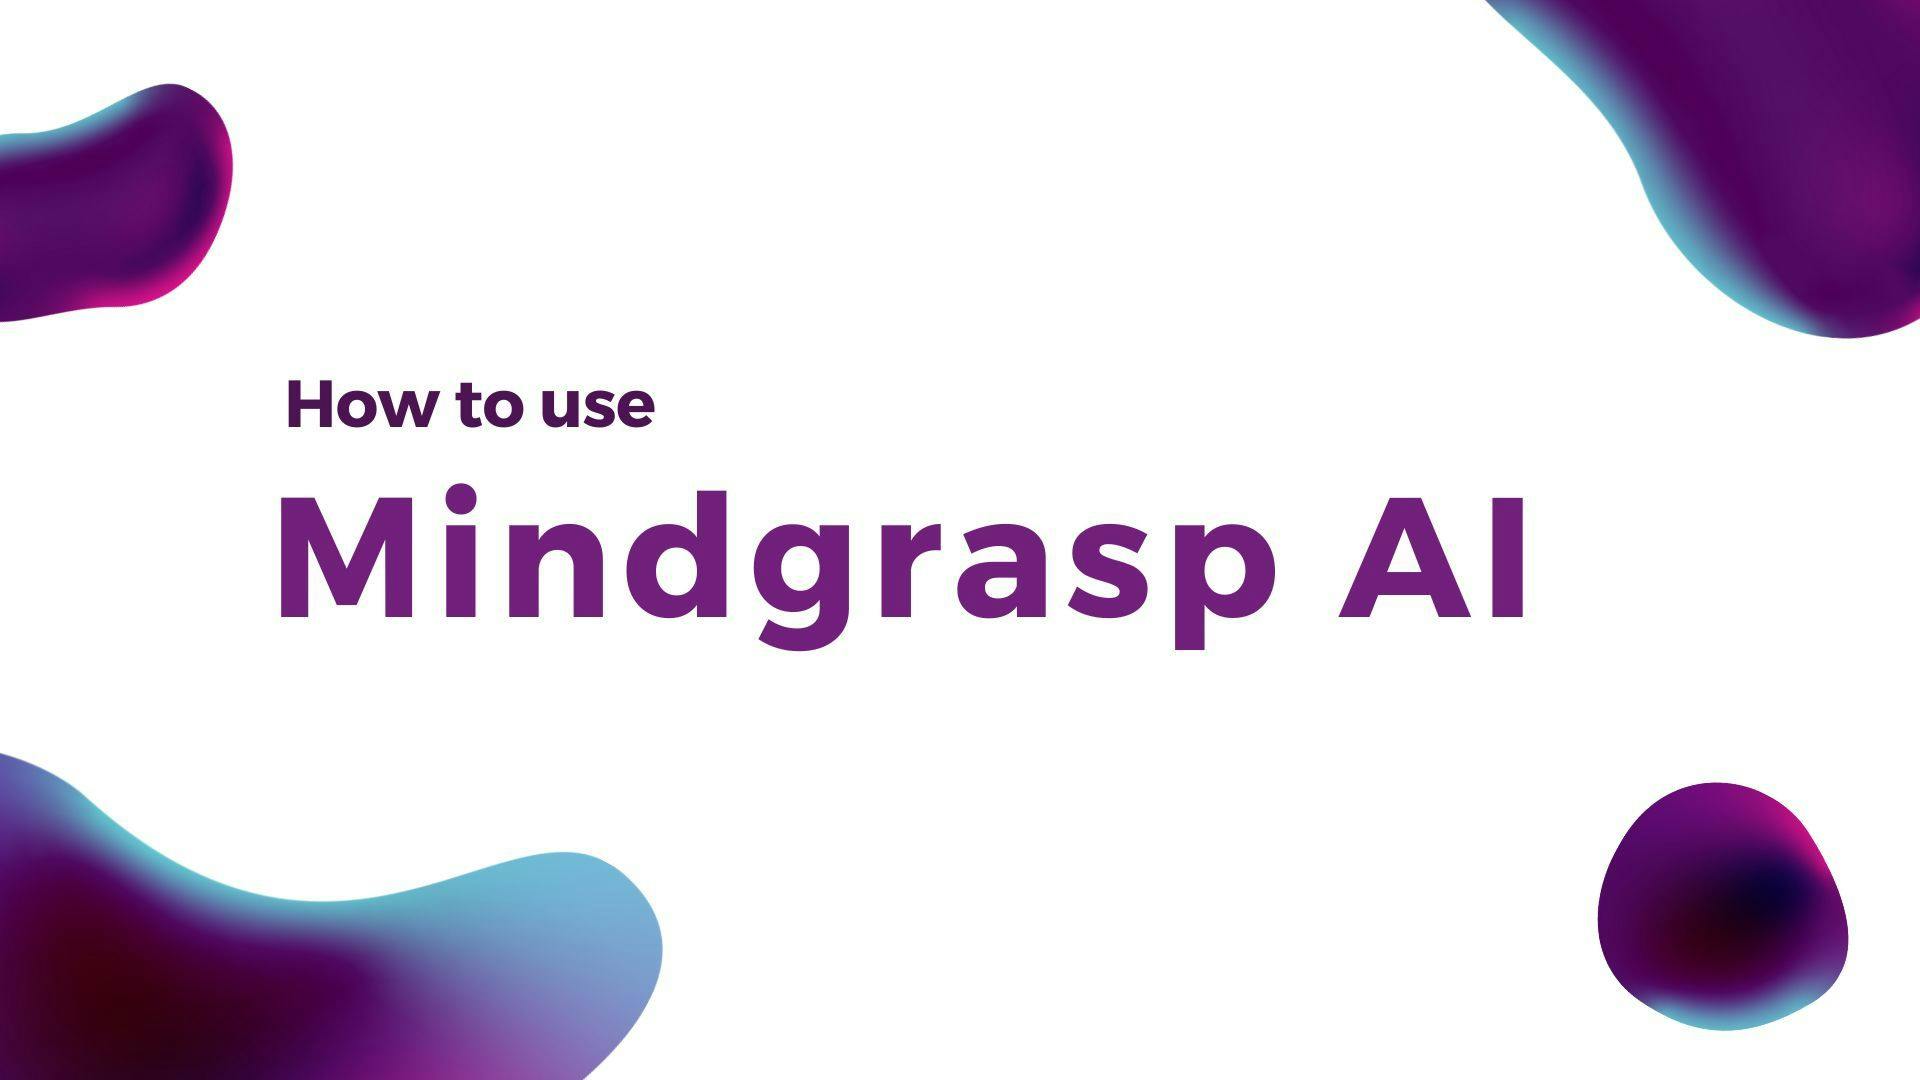 Cover Image for How to use Mindgrasp AI